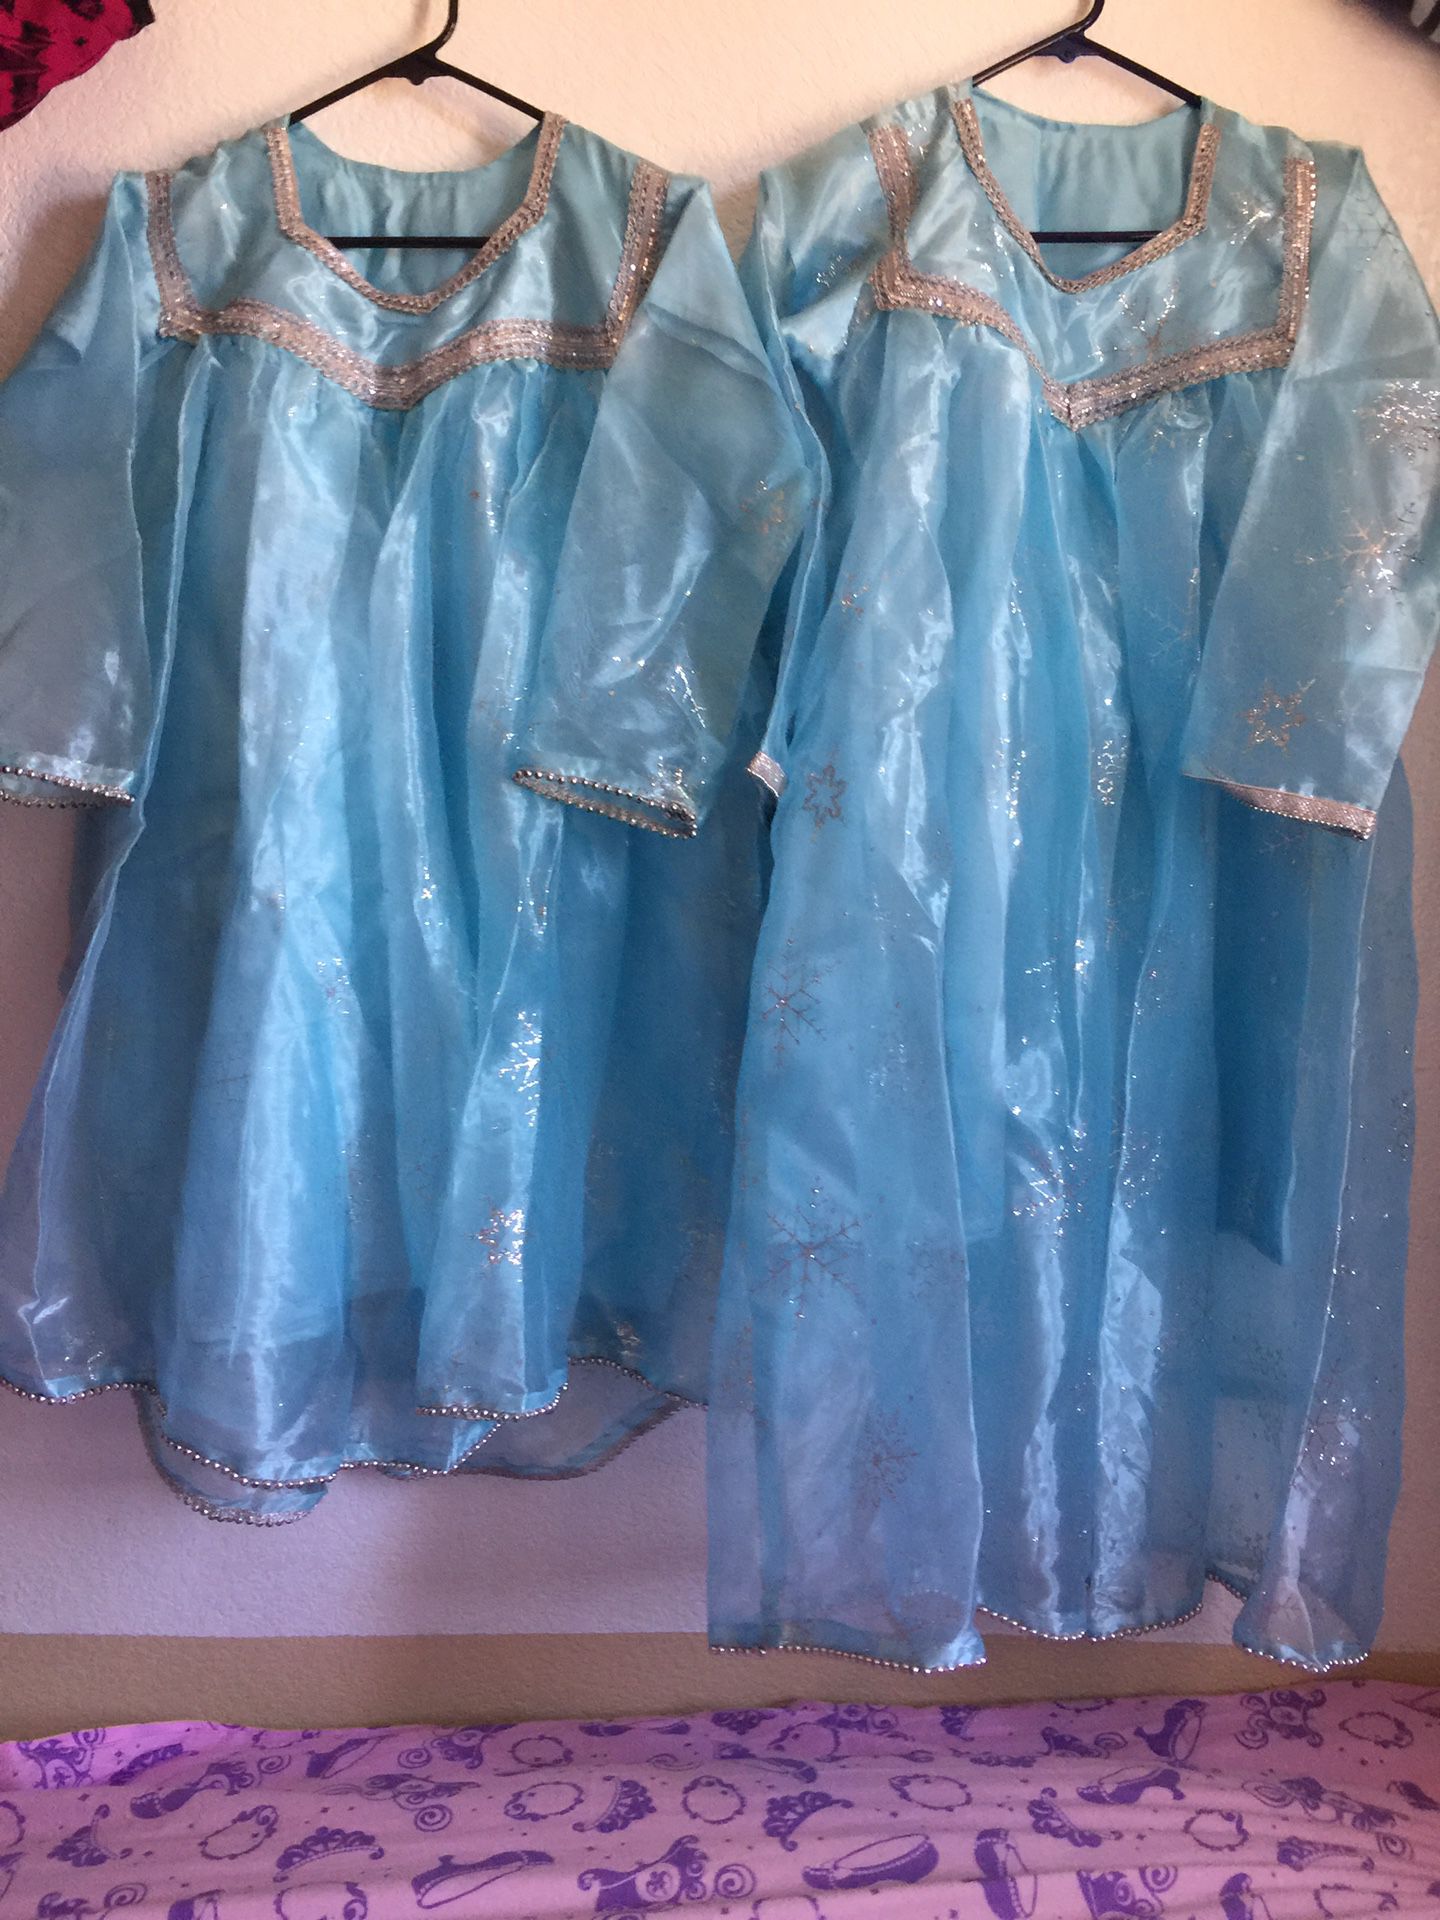 Frozen Elsa dresses with capes 10 year old size and 6 year old size $10 each